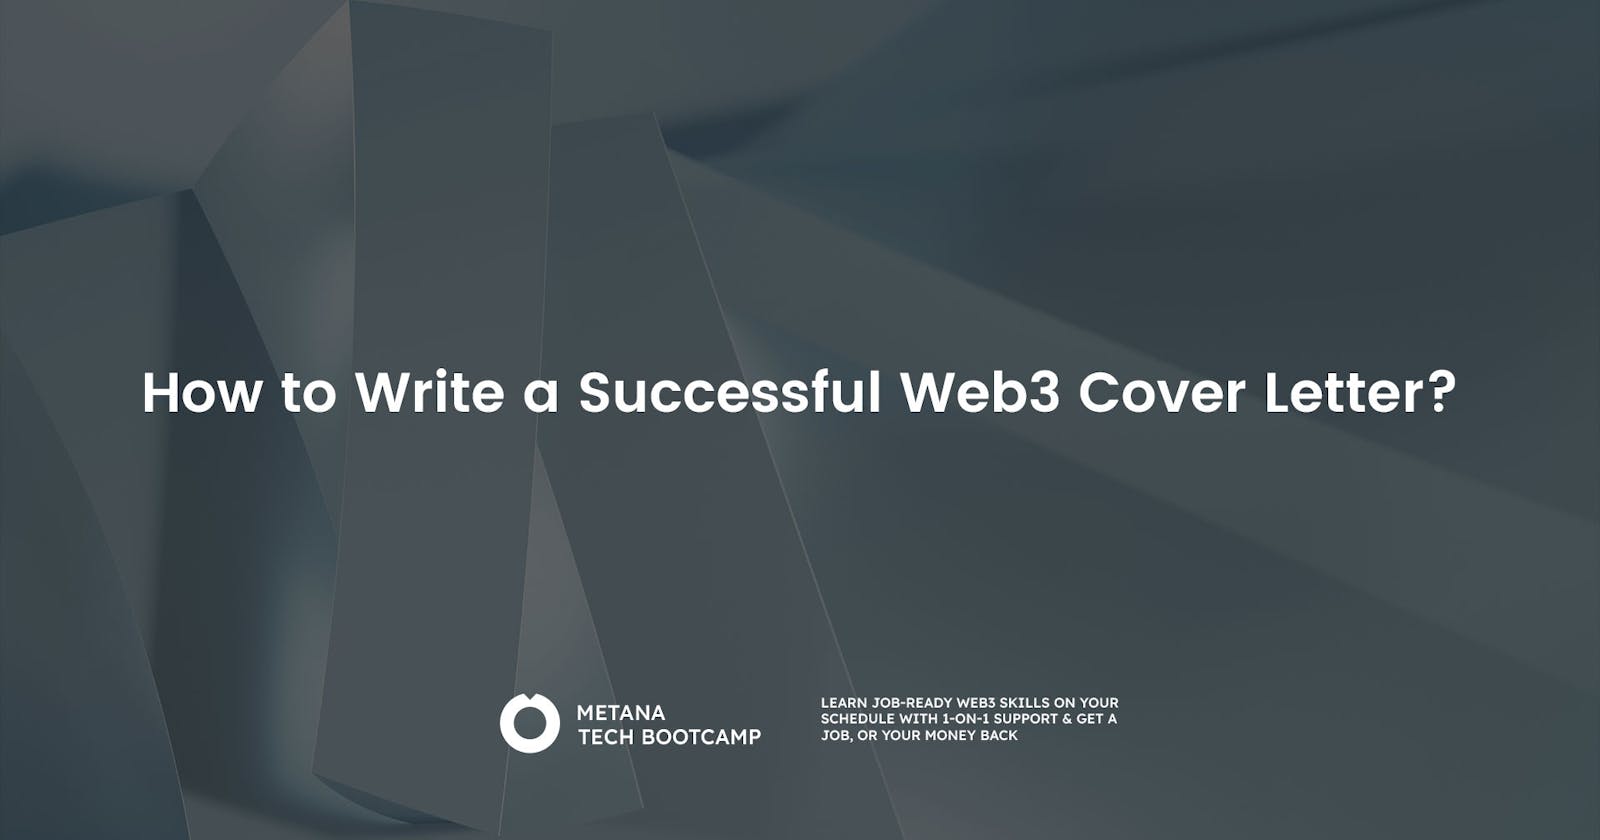 How to Write a Successful Web3 Cover Letter?